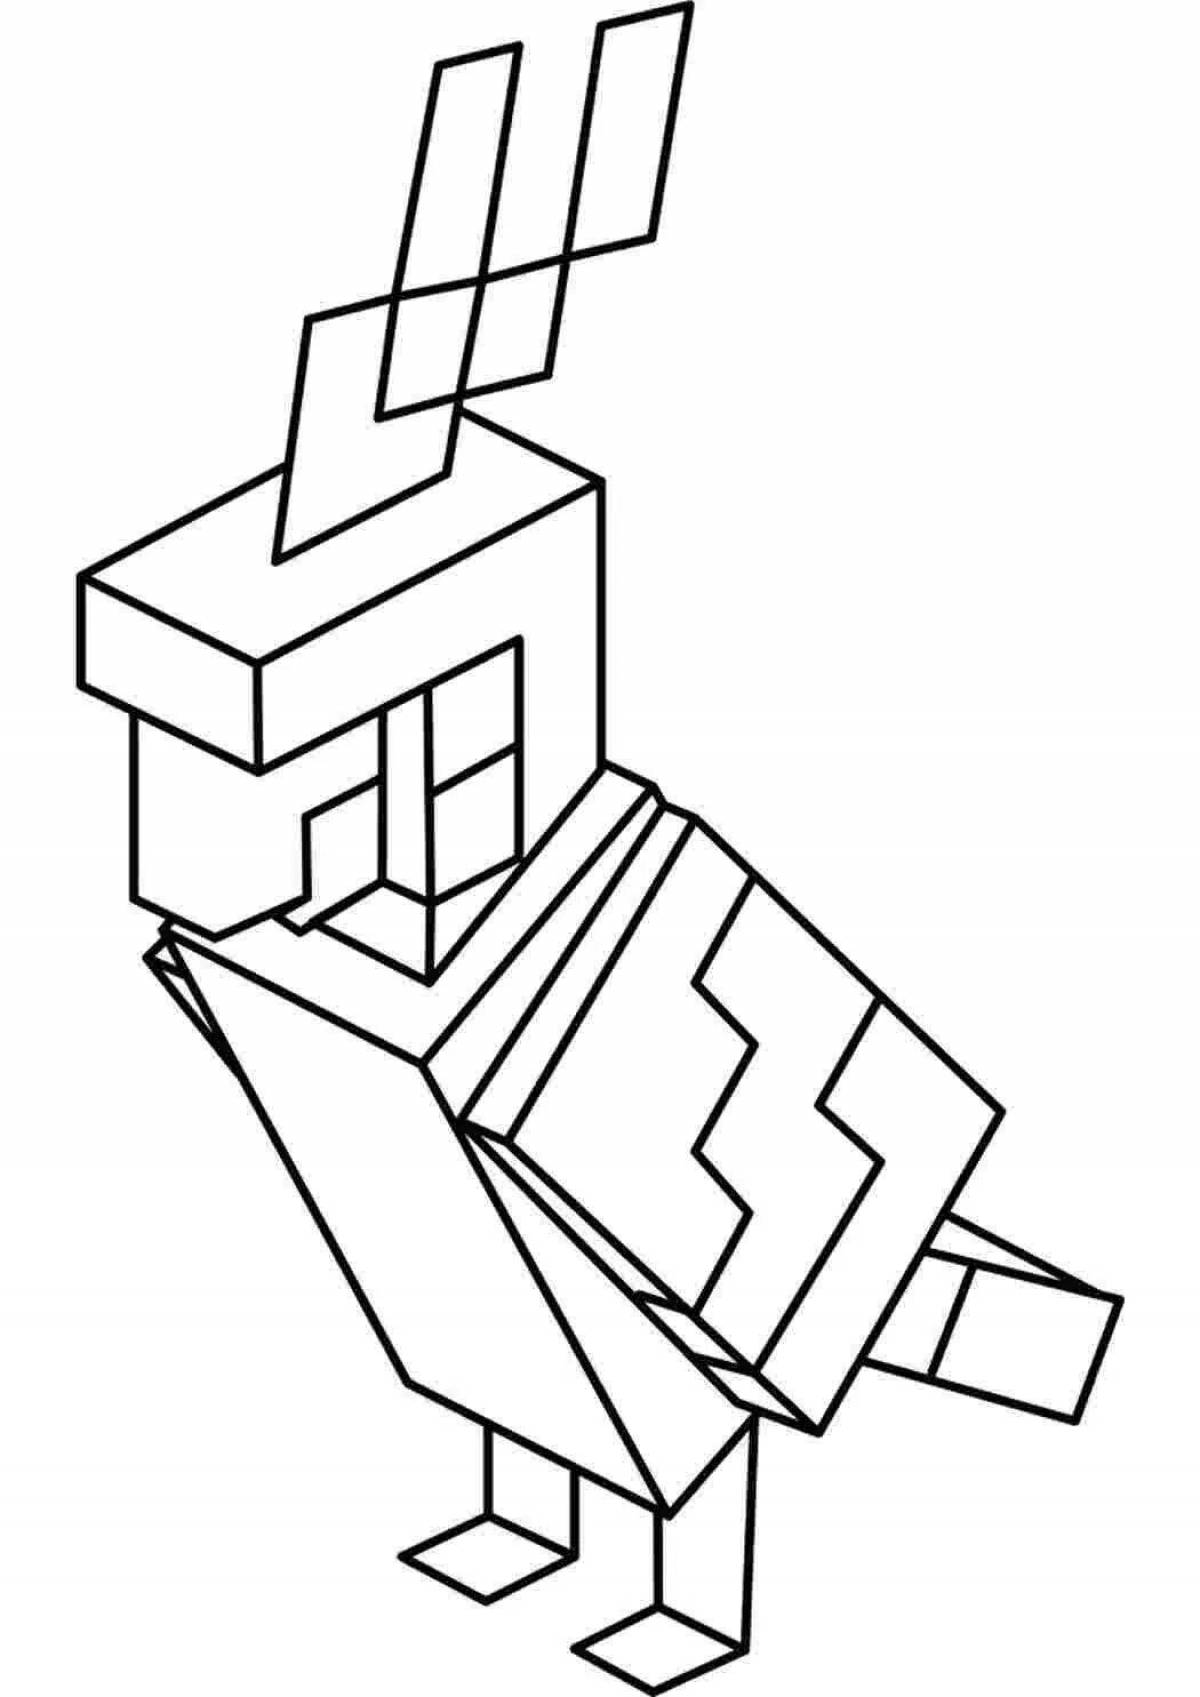 Exciting minecraft cover coloring page